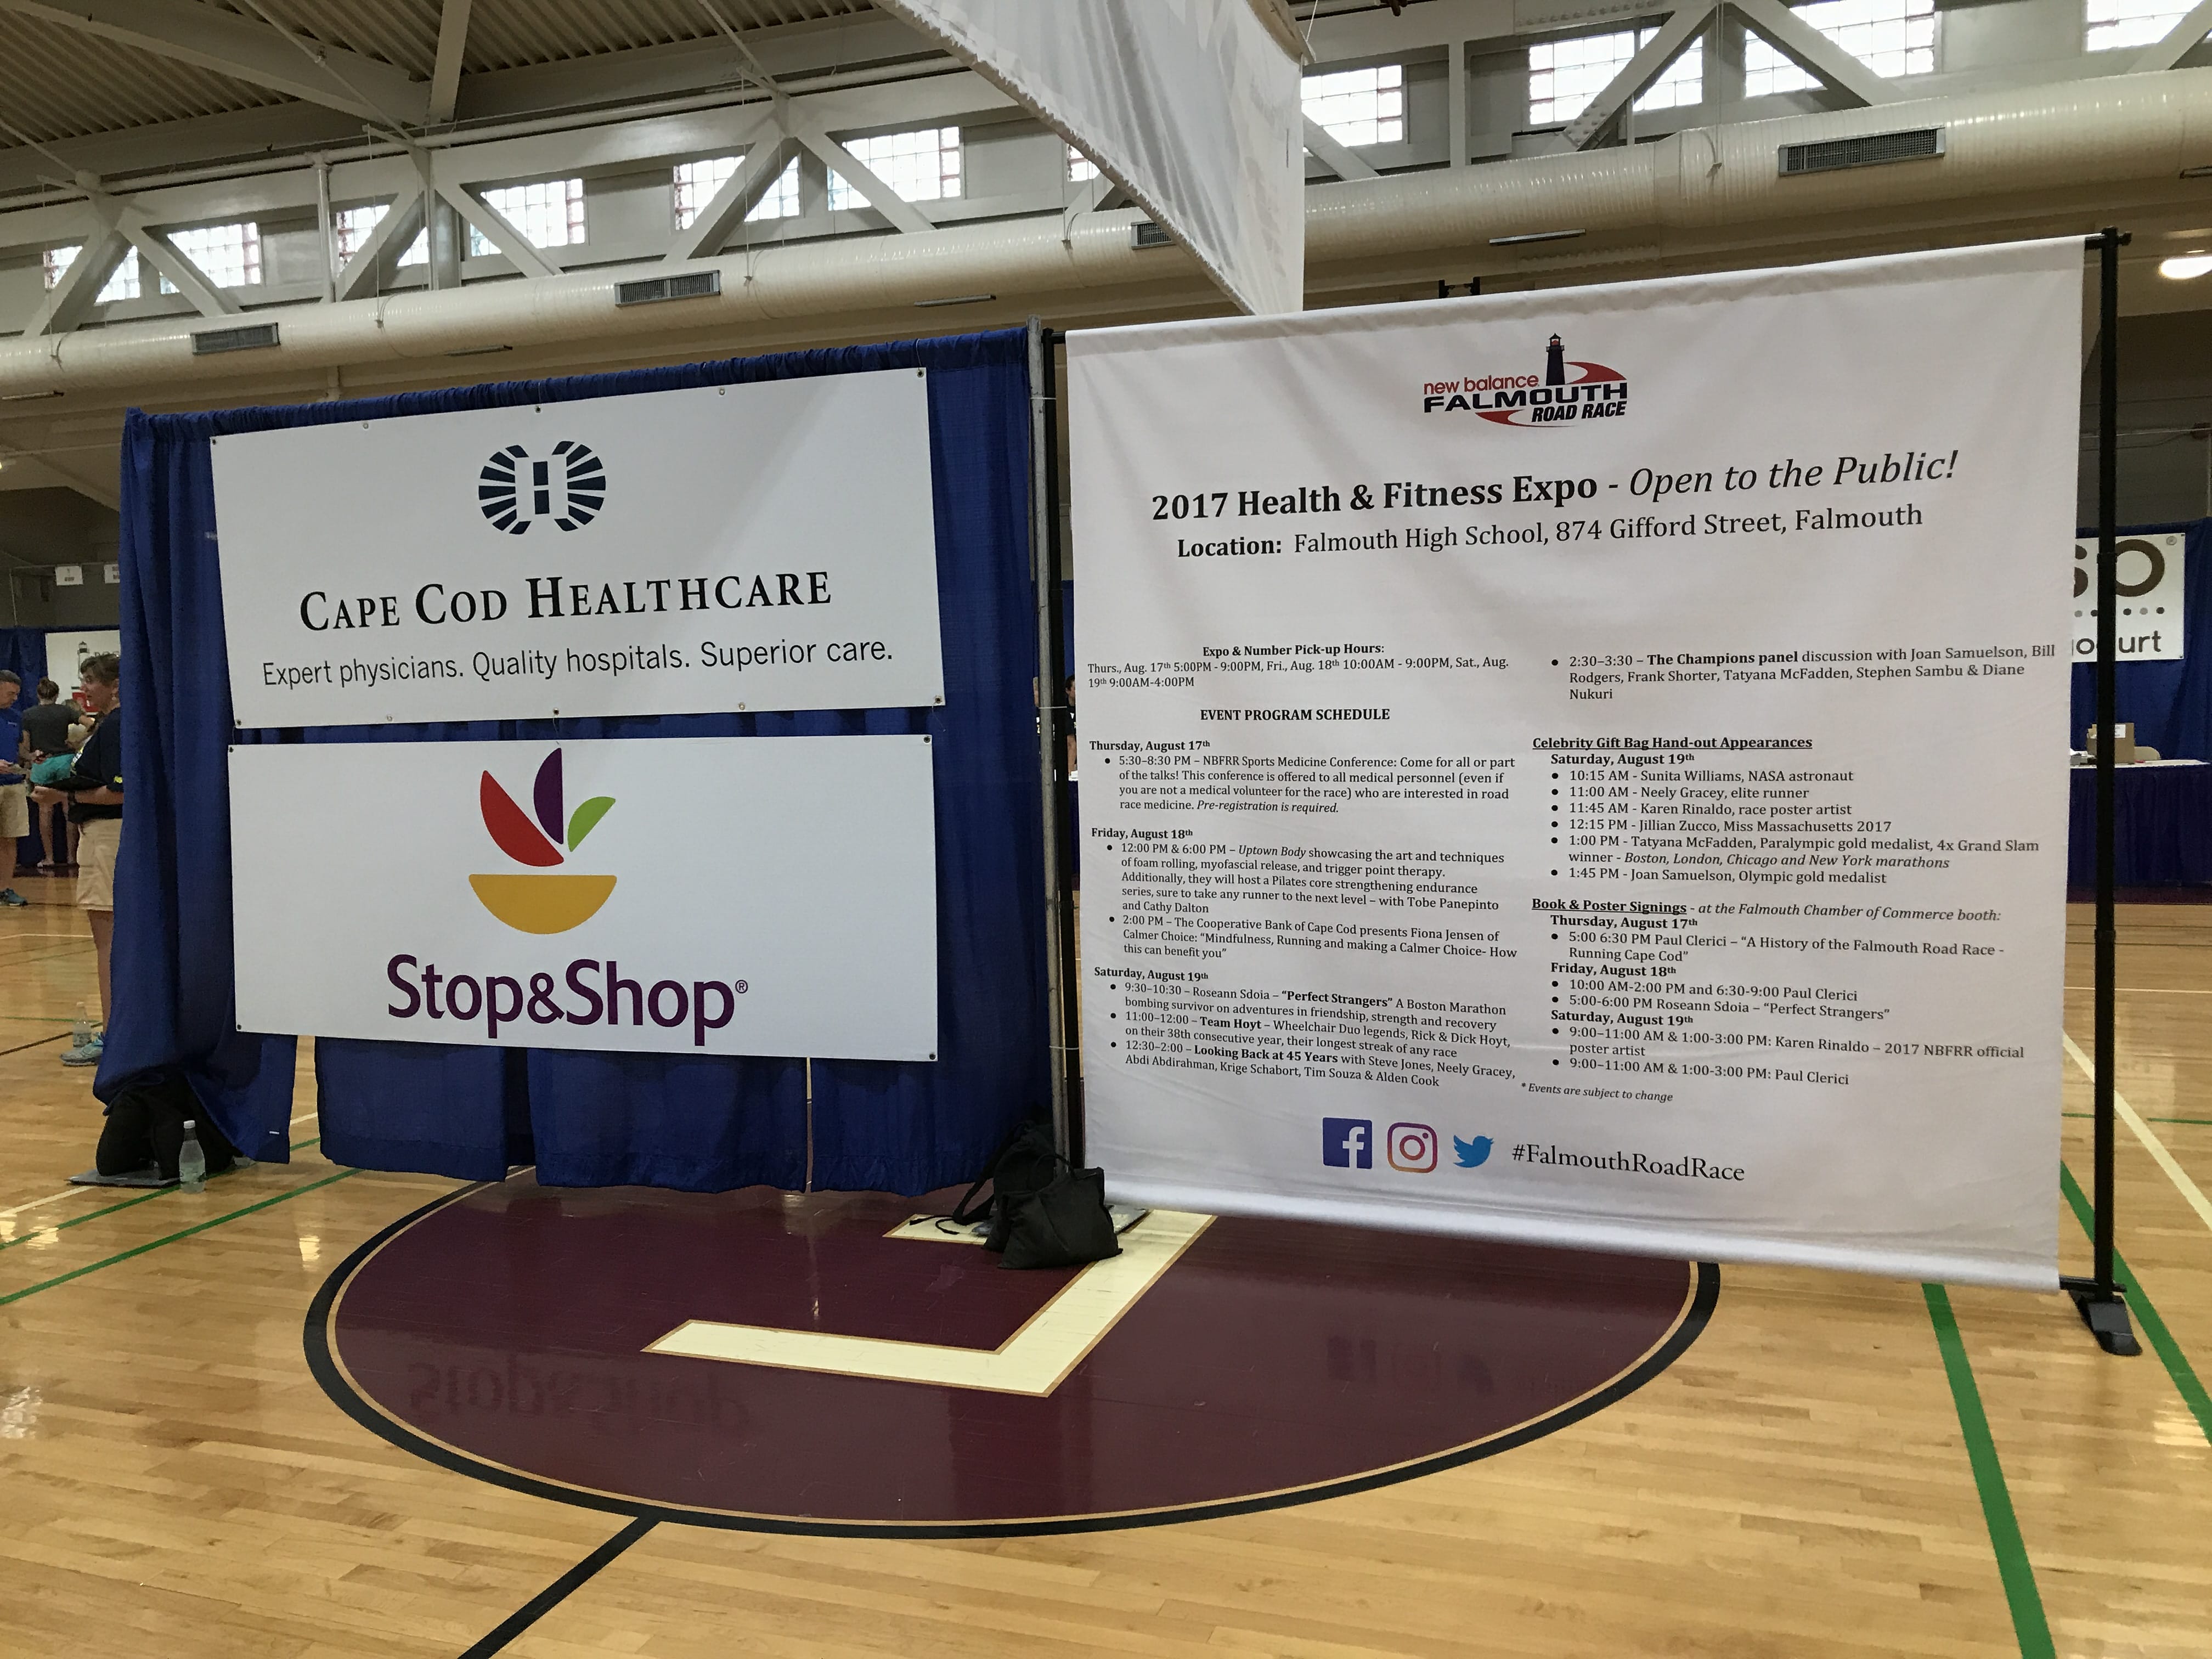 New Balance Falmouth Road Race Expo Sponsor Signage and Schedule Banner